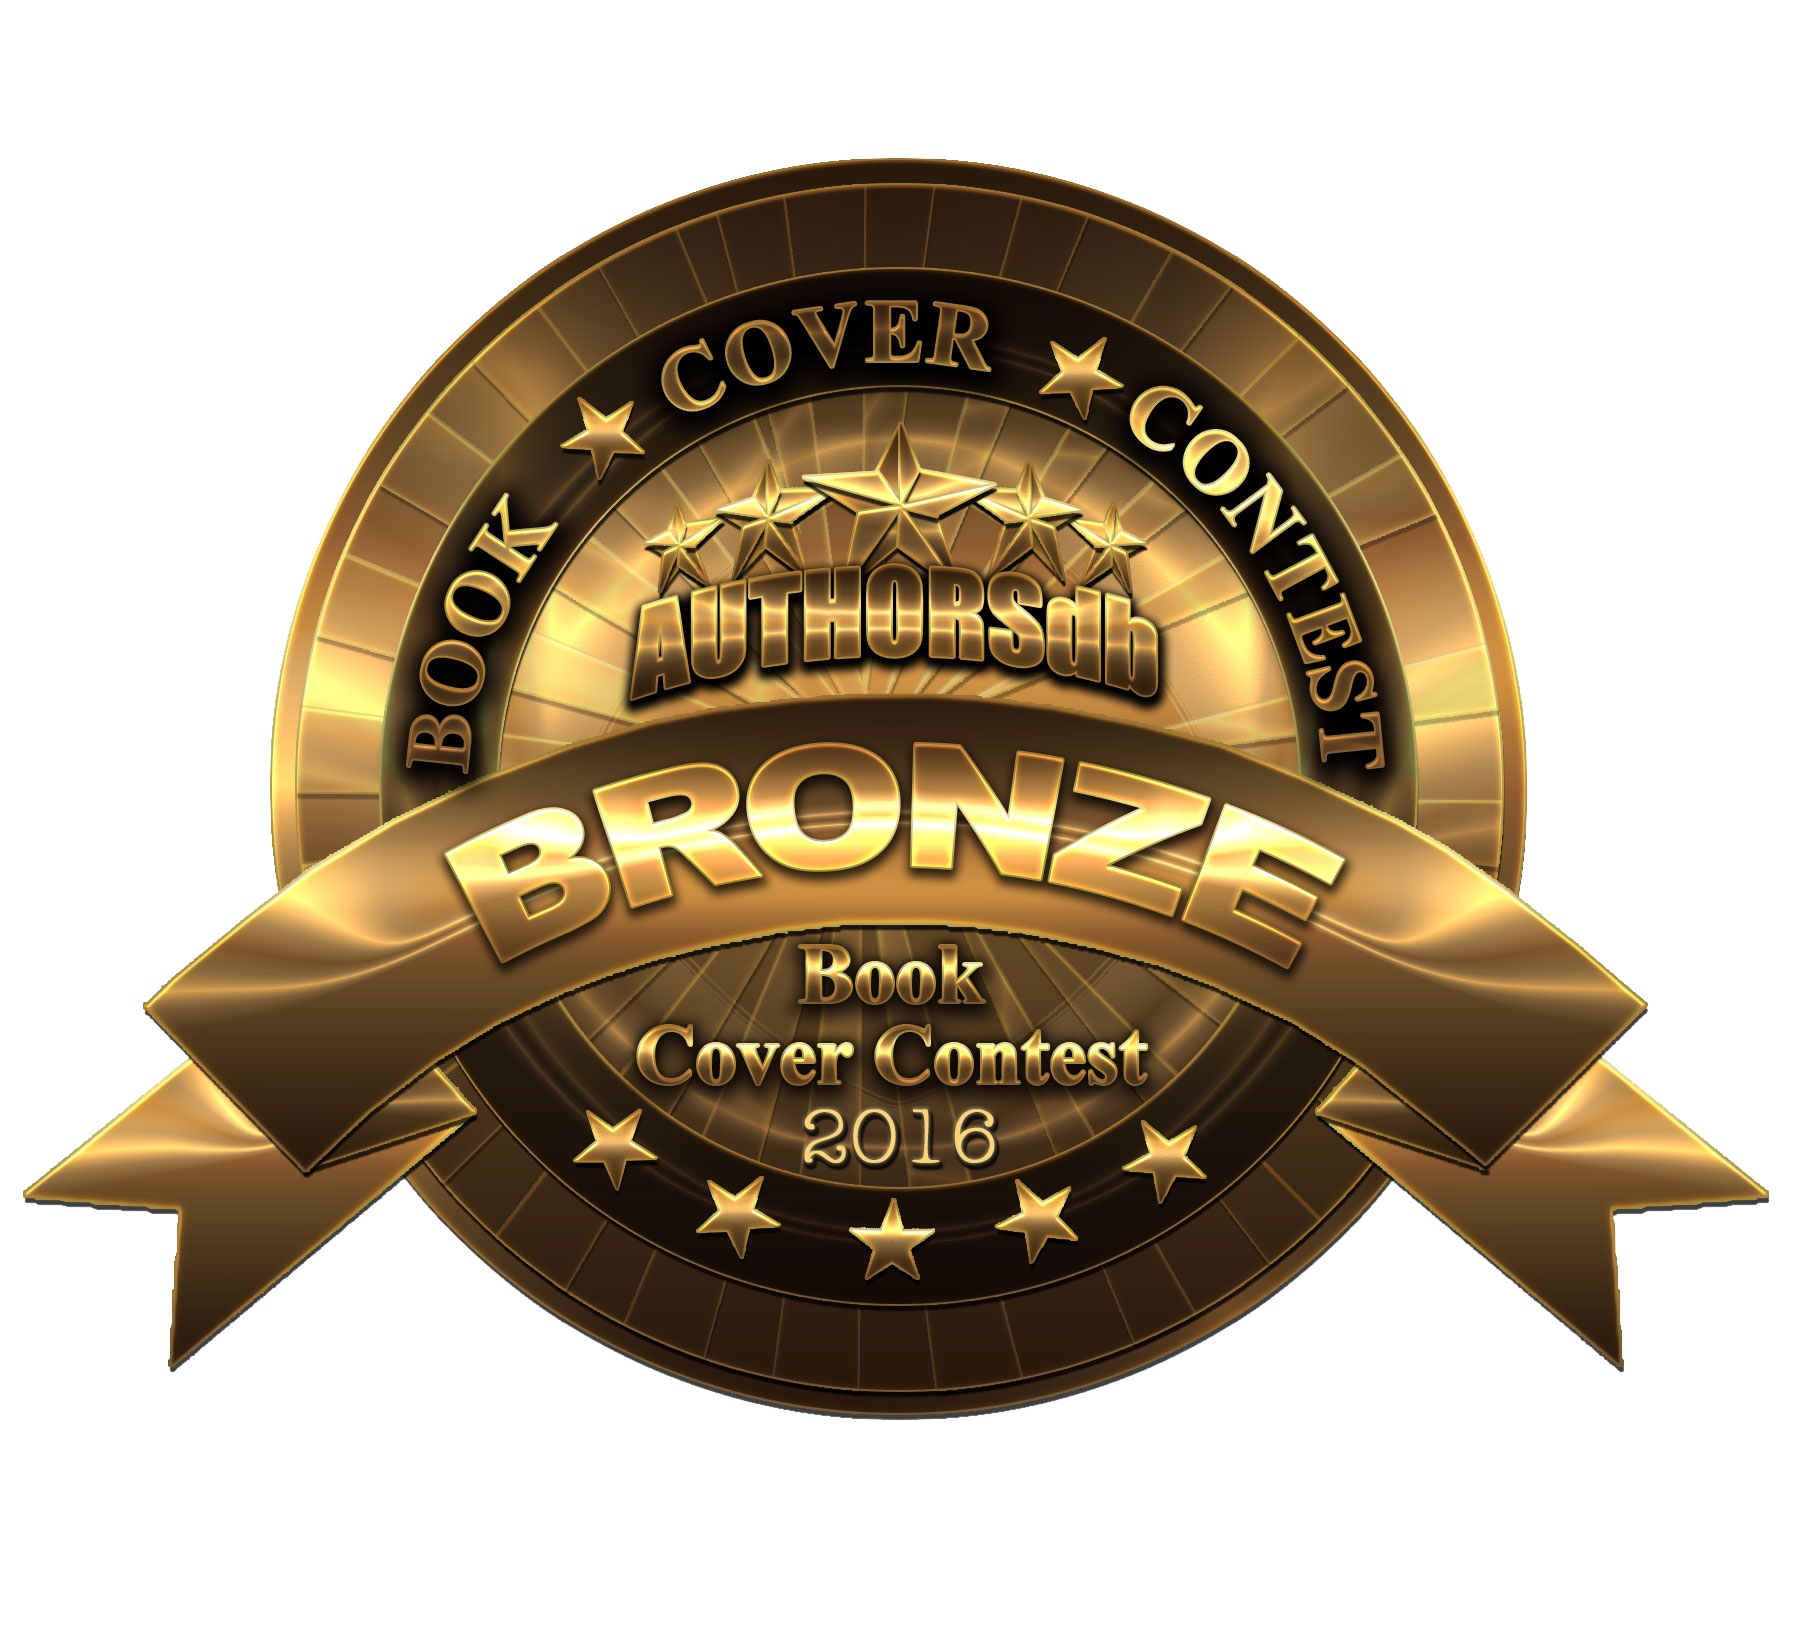 Bronze for best book cover in the Authordb 2016 cover content